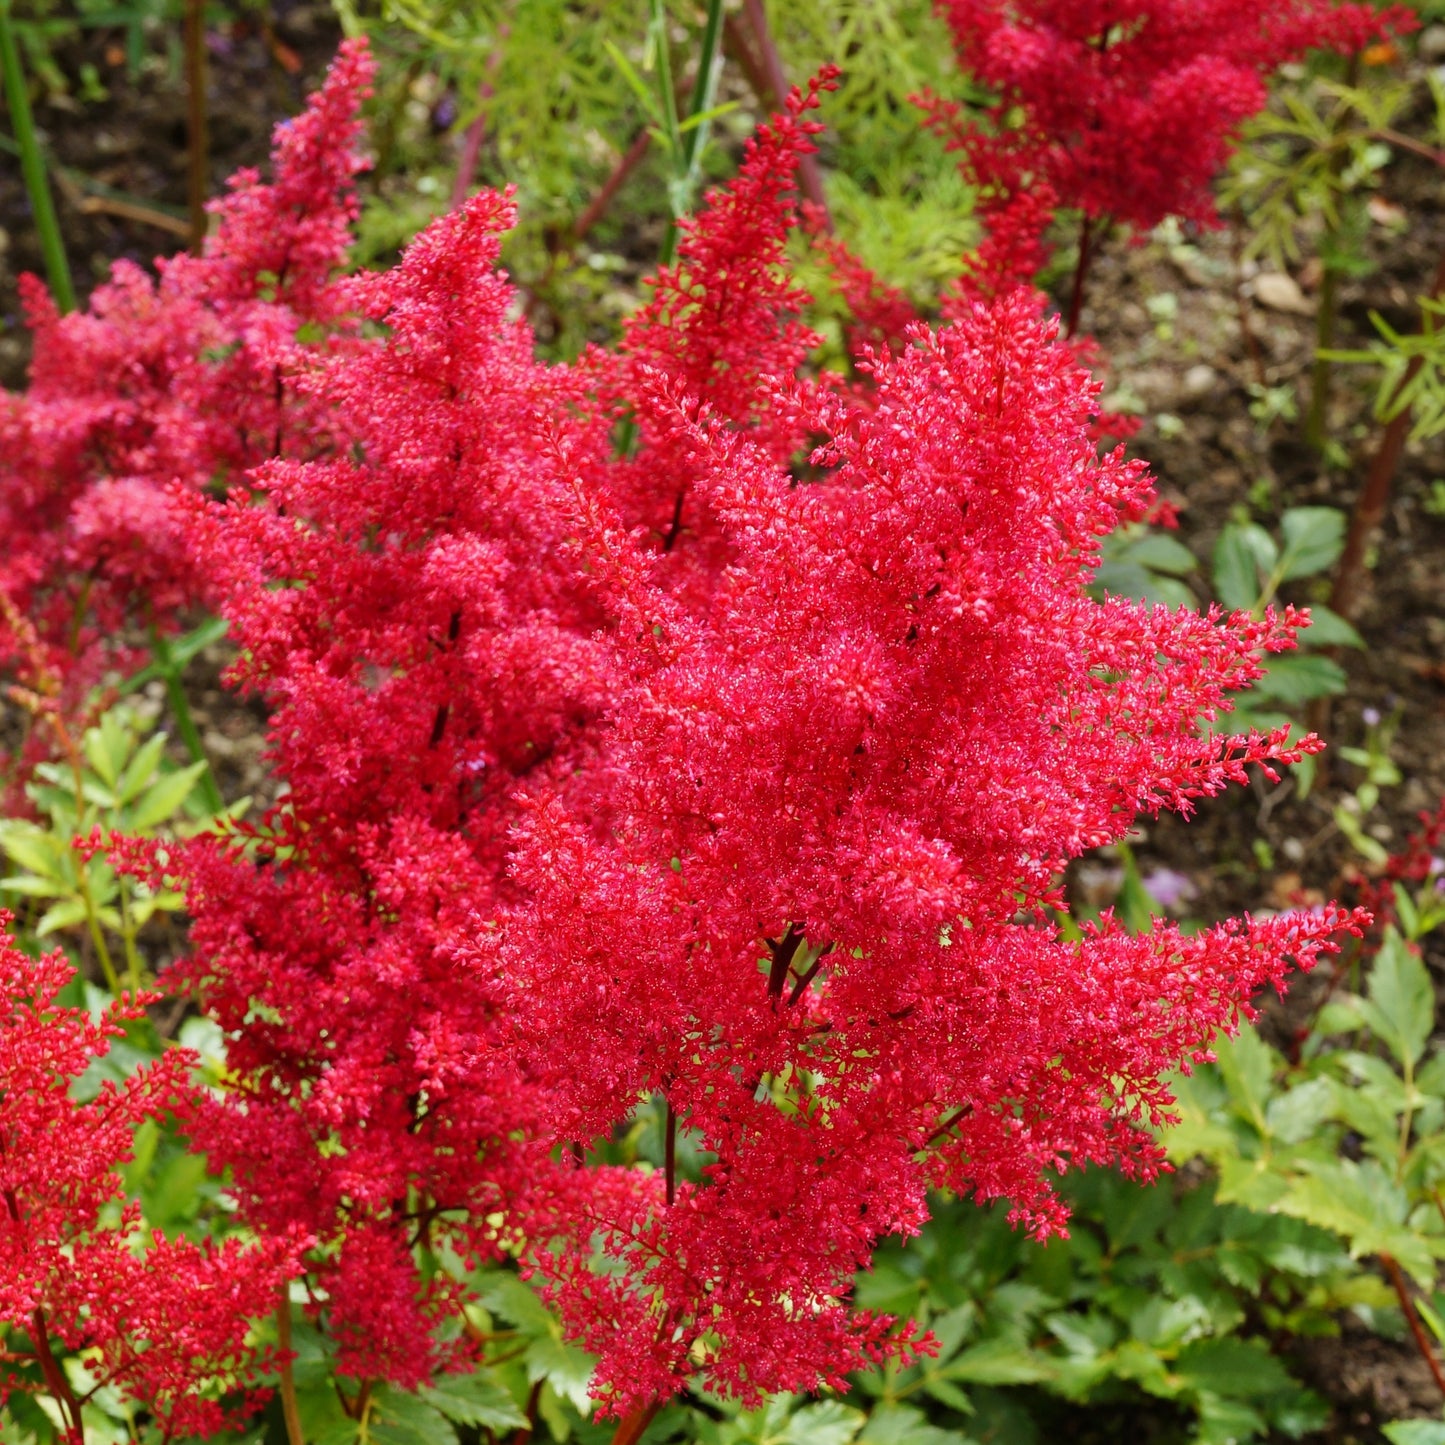 Exceptionally red feathery blooms truly glow in the shady garden with this astilbe